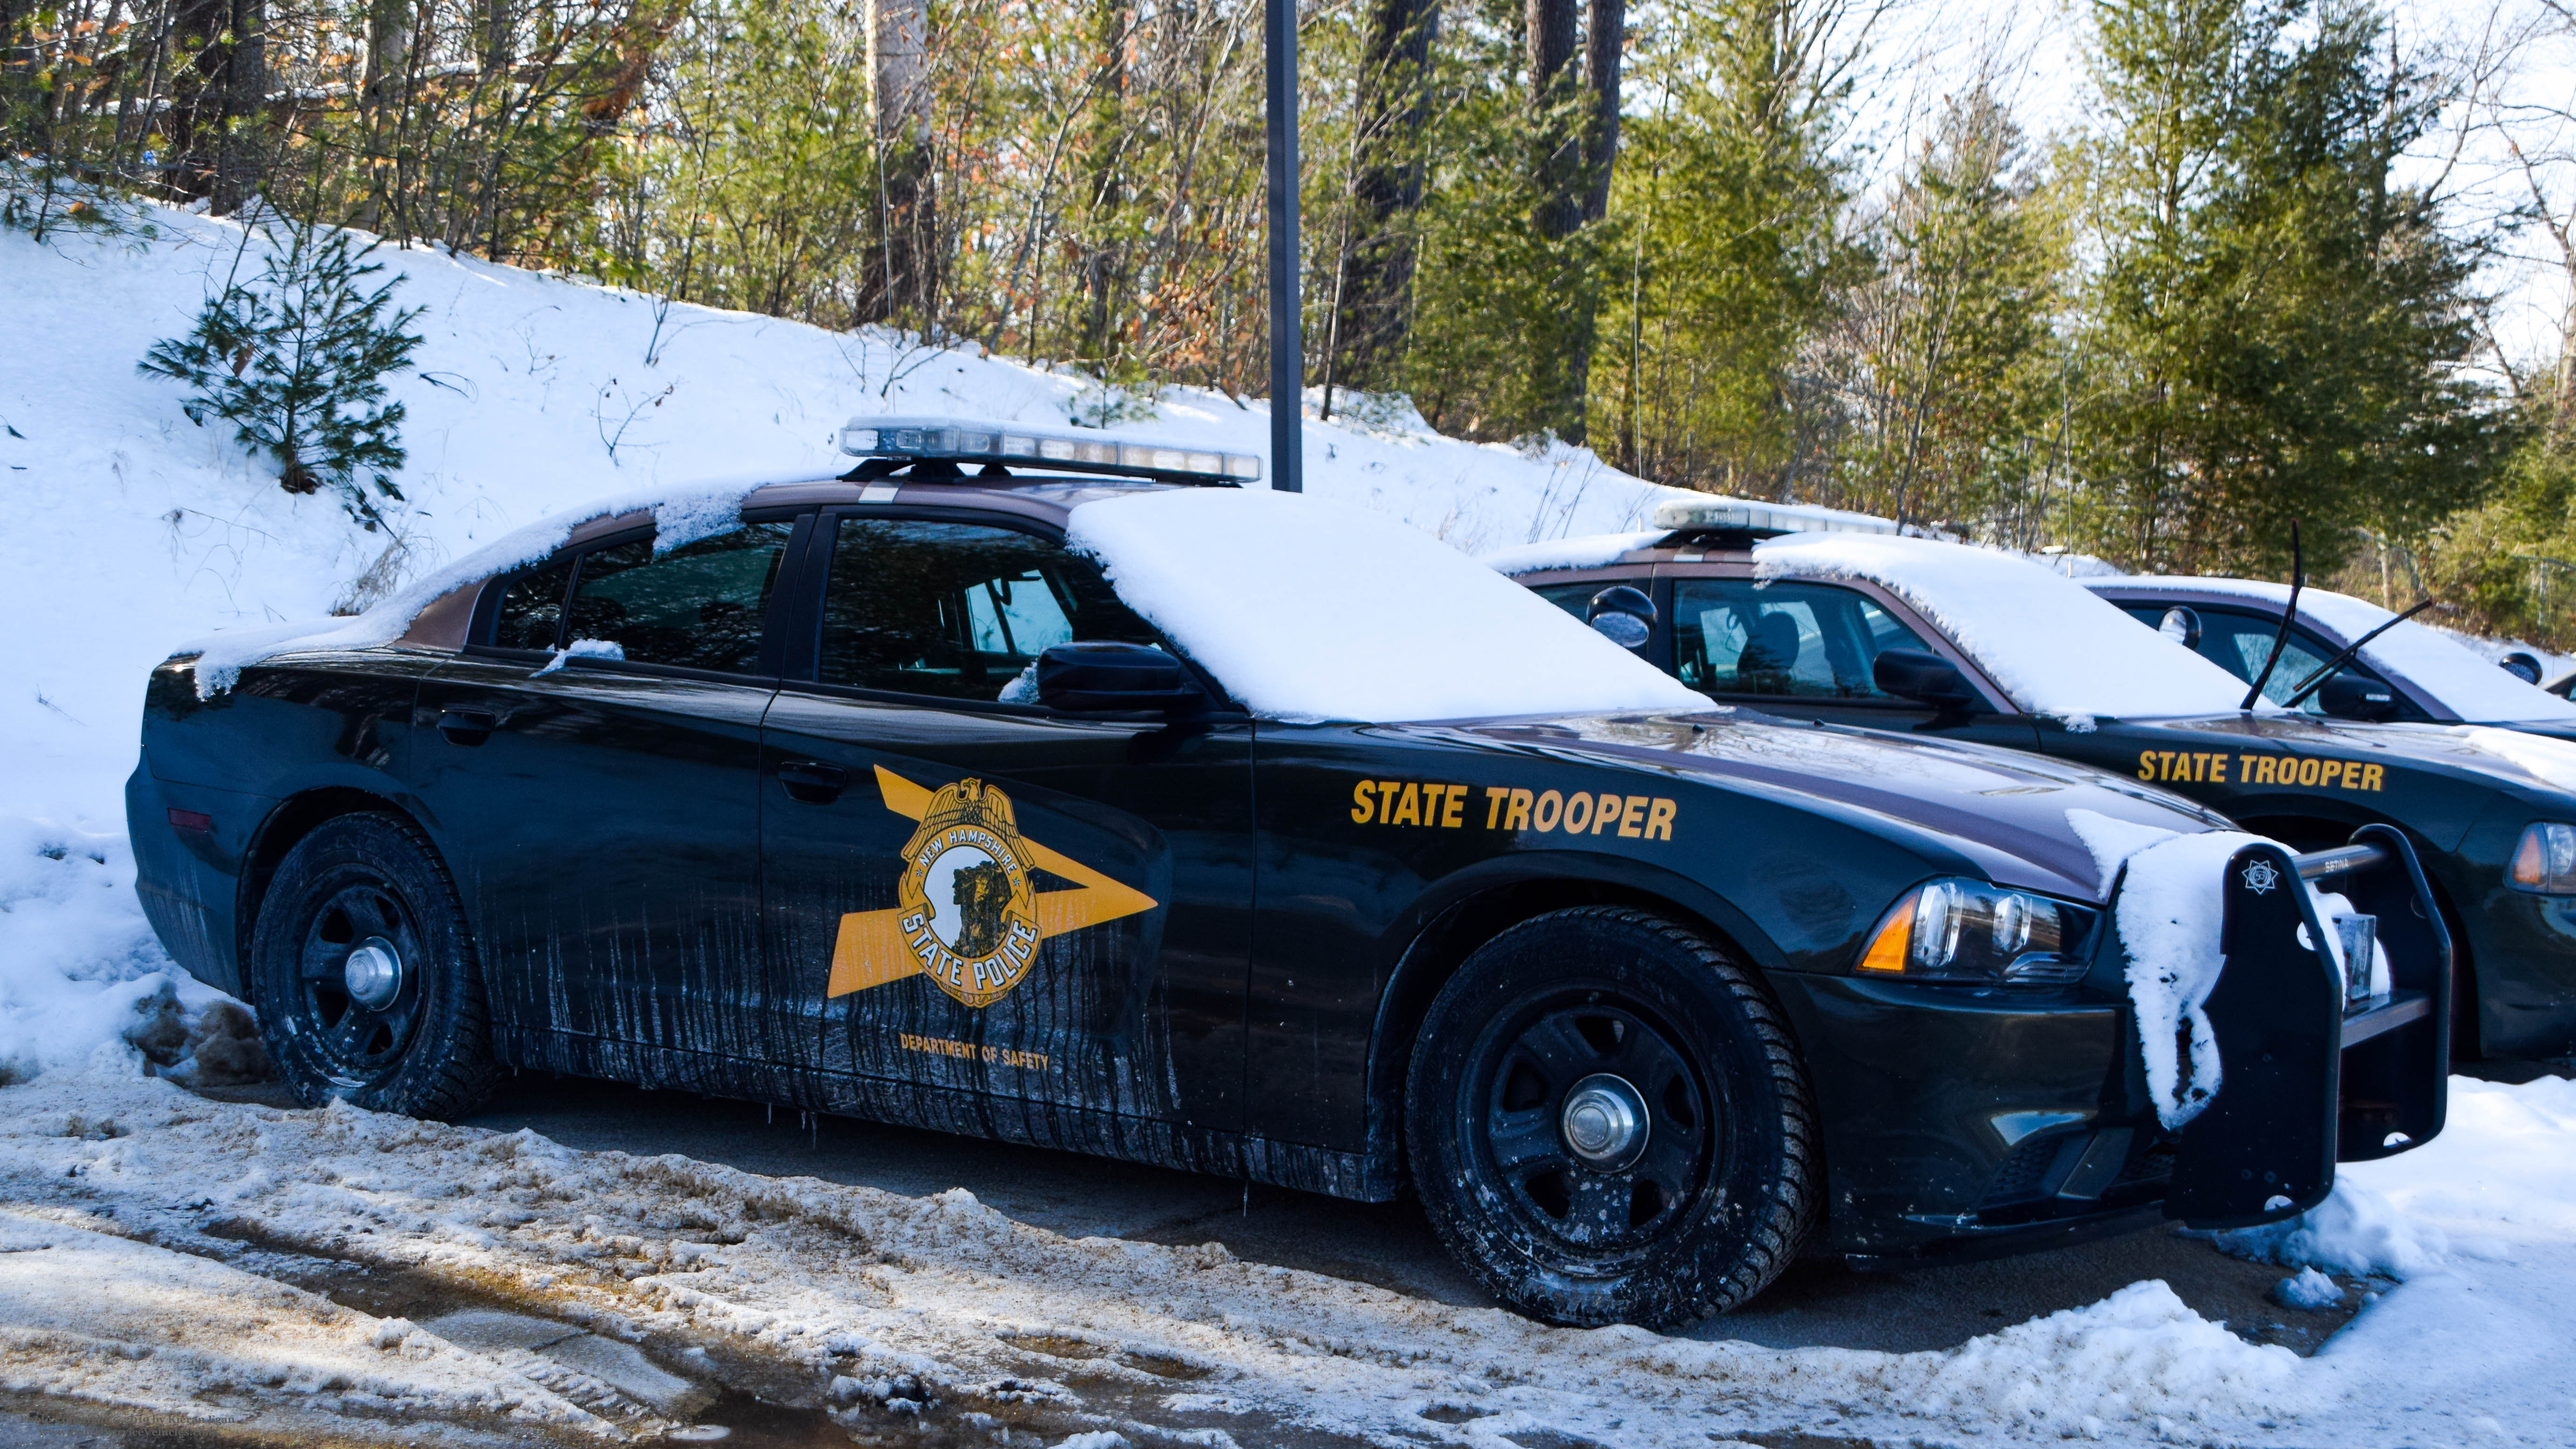 A photo  of New Hampshire State Police
            Cruiser 818, a 2011-2013 Dodge Charger             taken by Kieran Egan